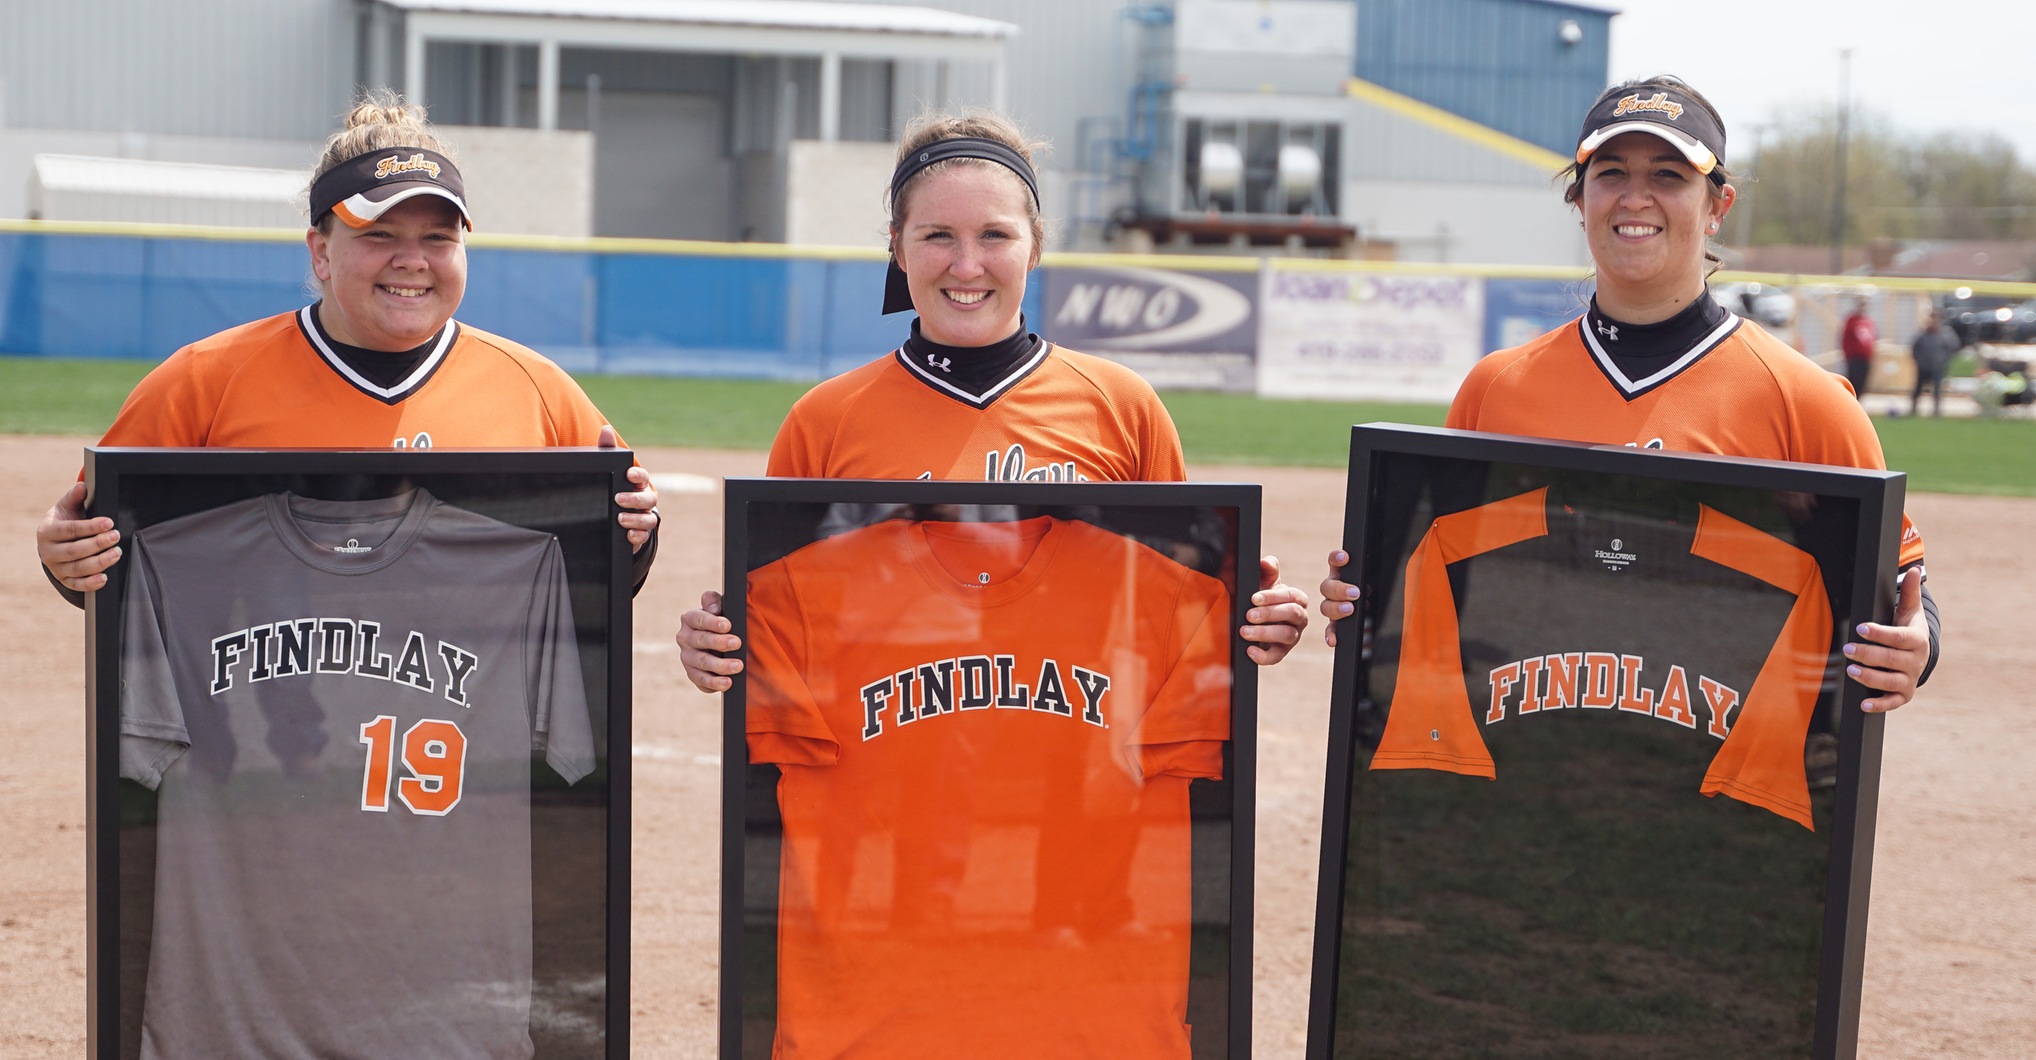 Salwa Al-Hajabed, Hailey Bryan, and Amanda DelMonte pose with their jerseys on Senior Day